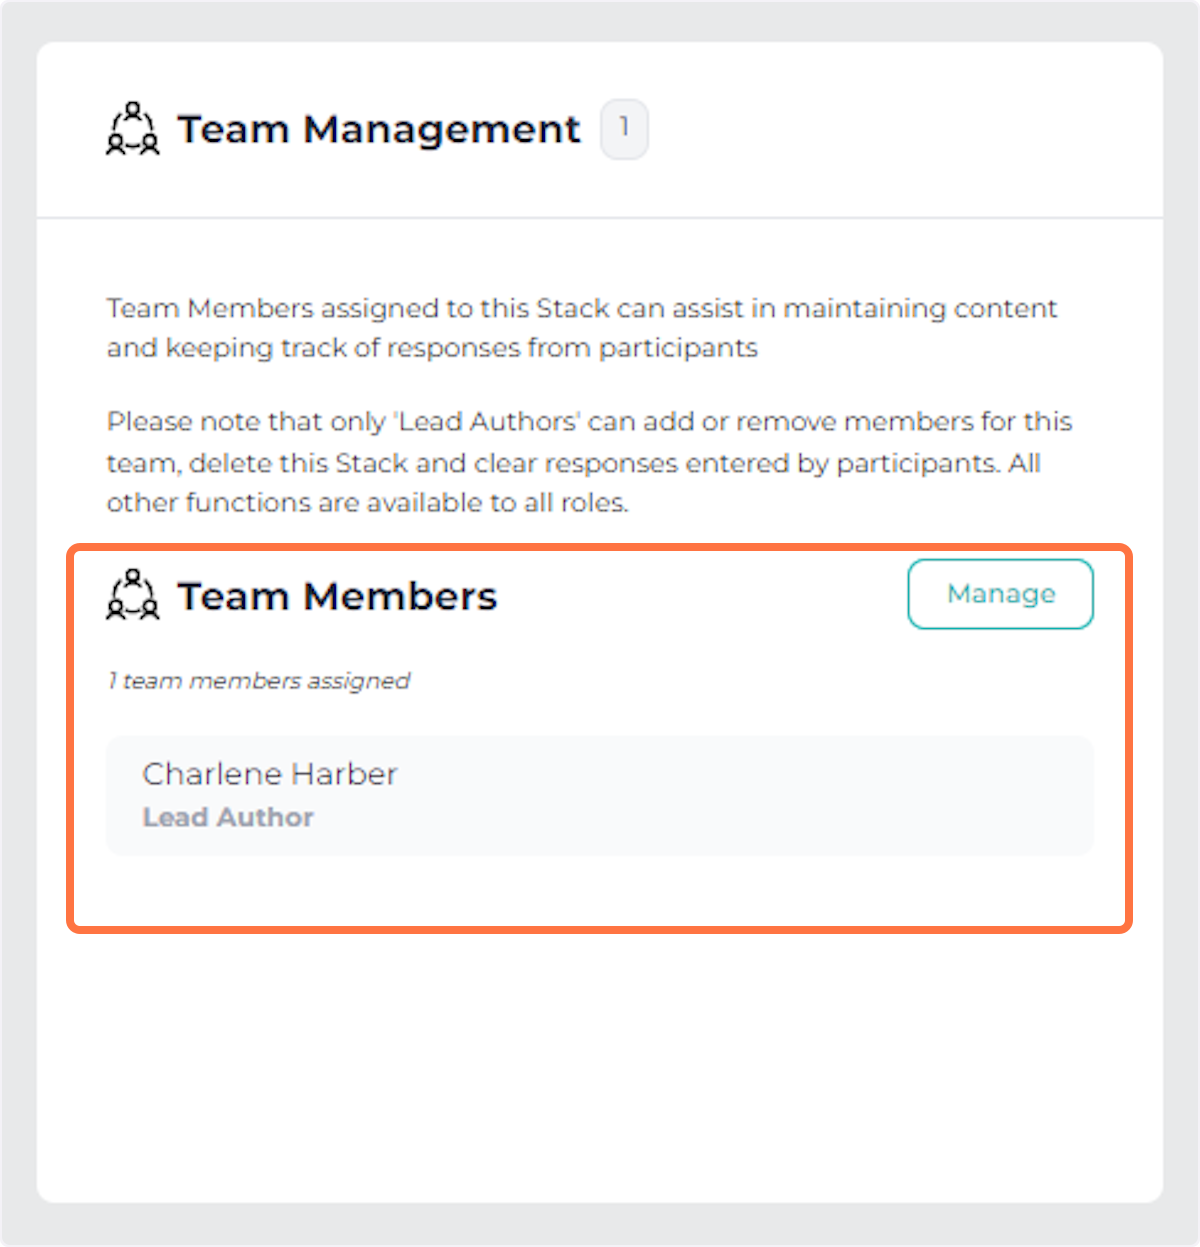 You can view the Team Members who are currently Authors for the Stack.